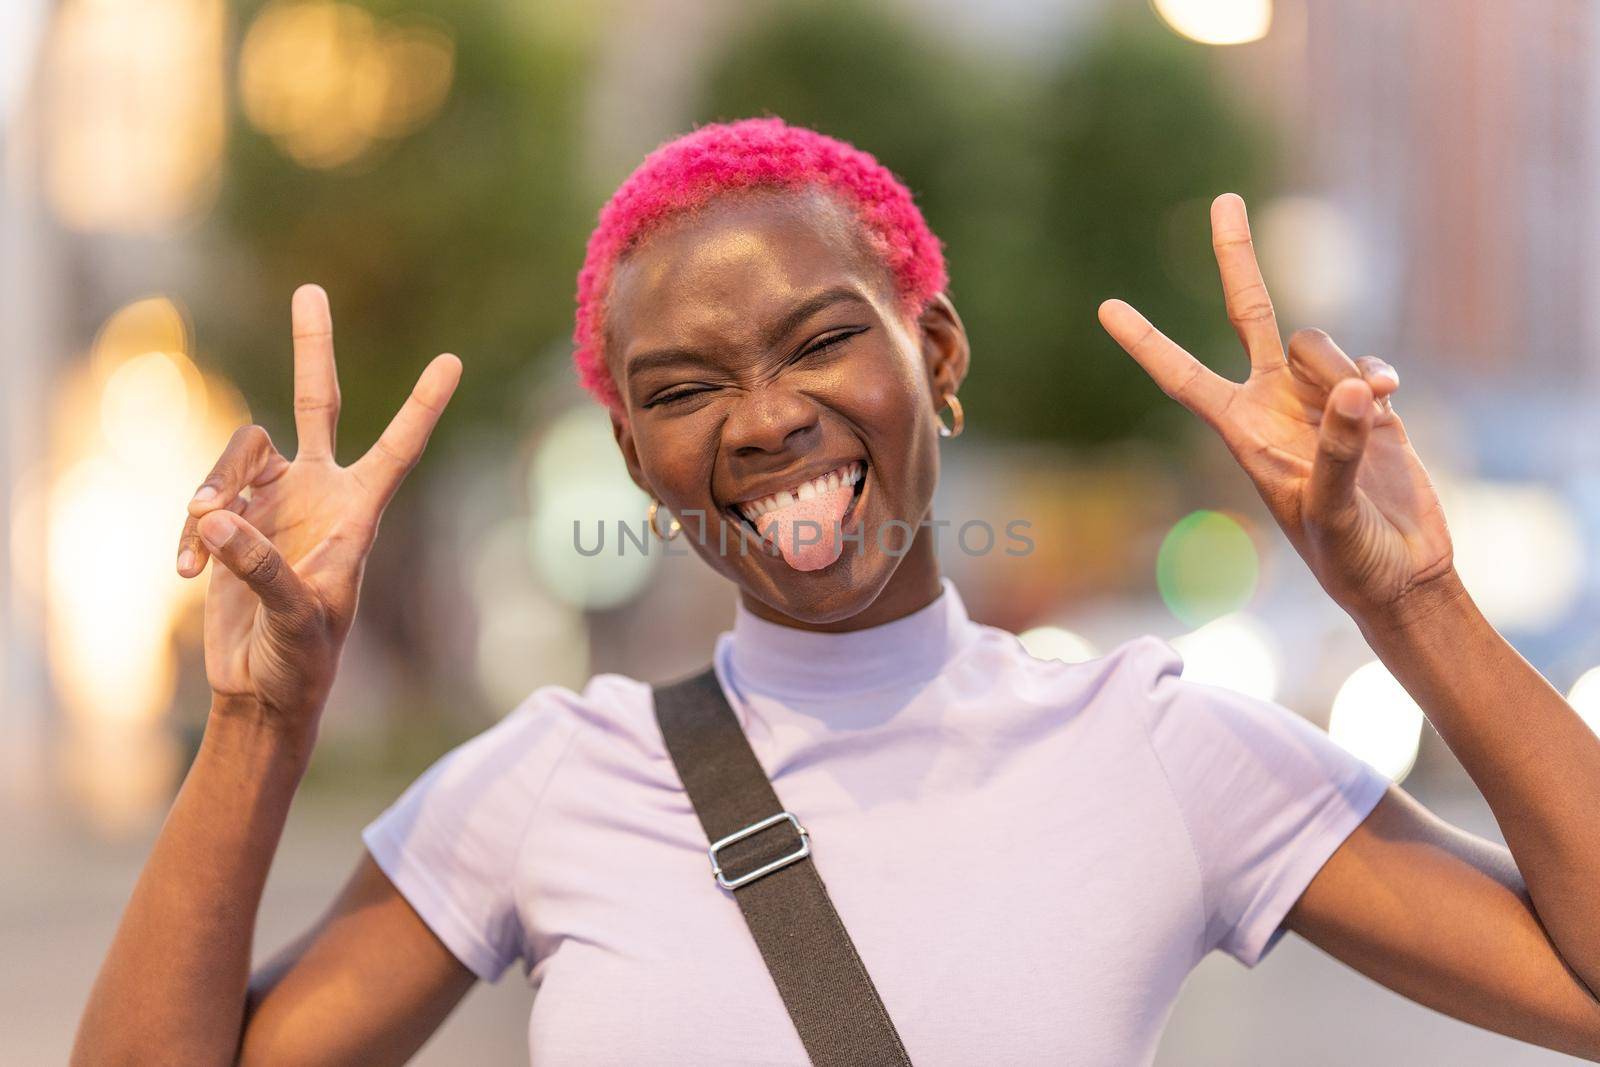 Stylish african woman raising the fingers gesturing victory while grimacing to the camera